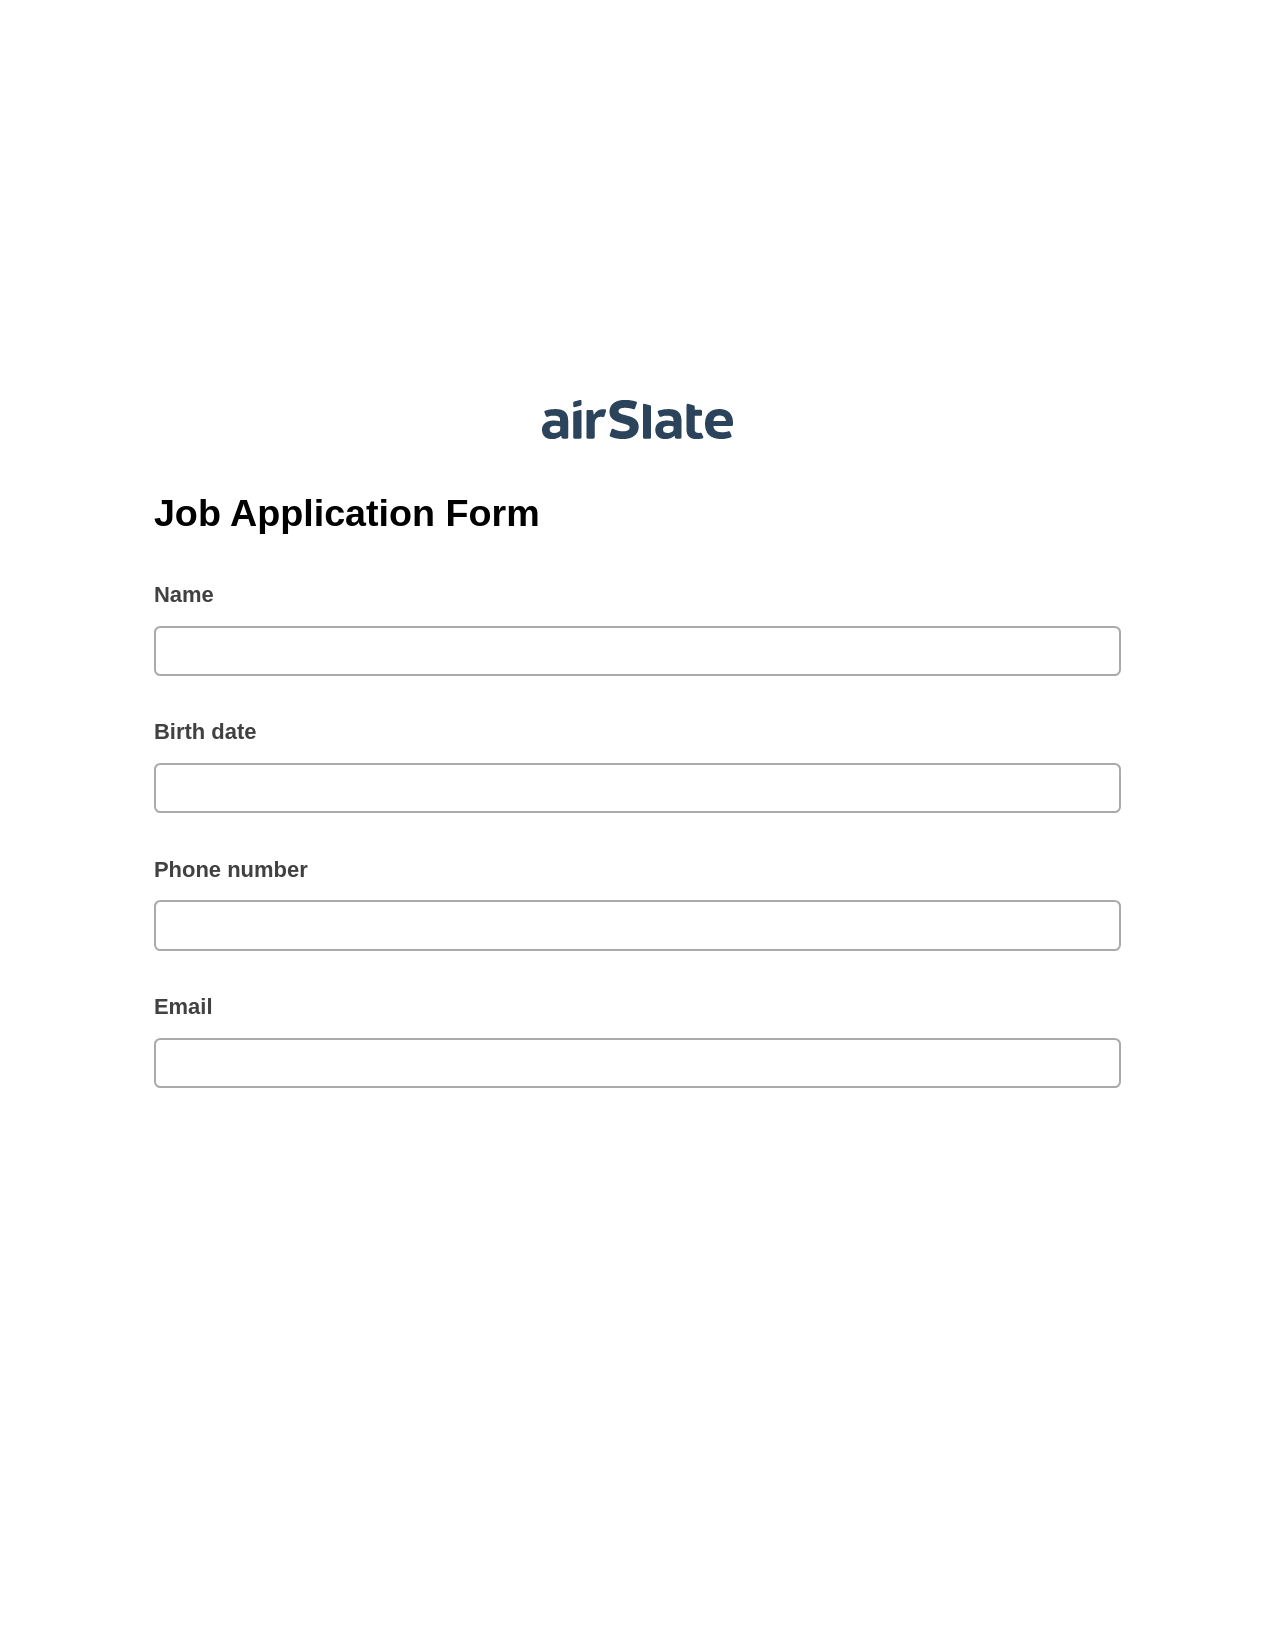 Multirole Job Application Form Pre-fill from Salesforce Records with SOQL Bot, Pre-fill with Custom Data Bot, OneDrive Bot